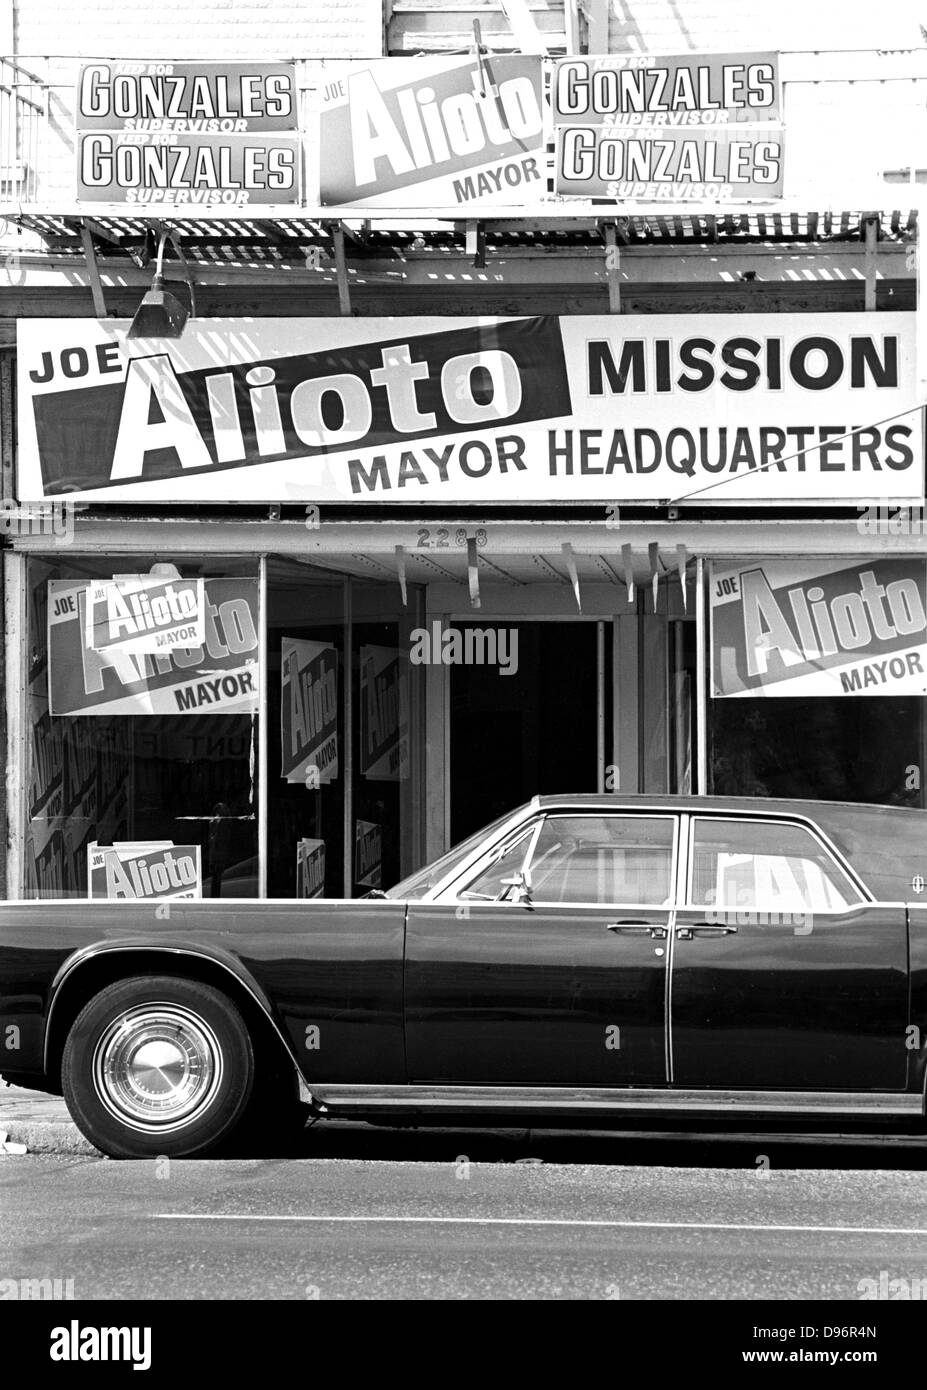 Mission stree view of democratic headquarter in the San Francisco mission district of San Francisco in the seventies Stock Photo